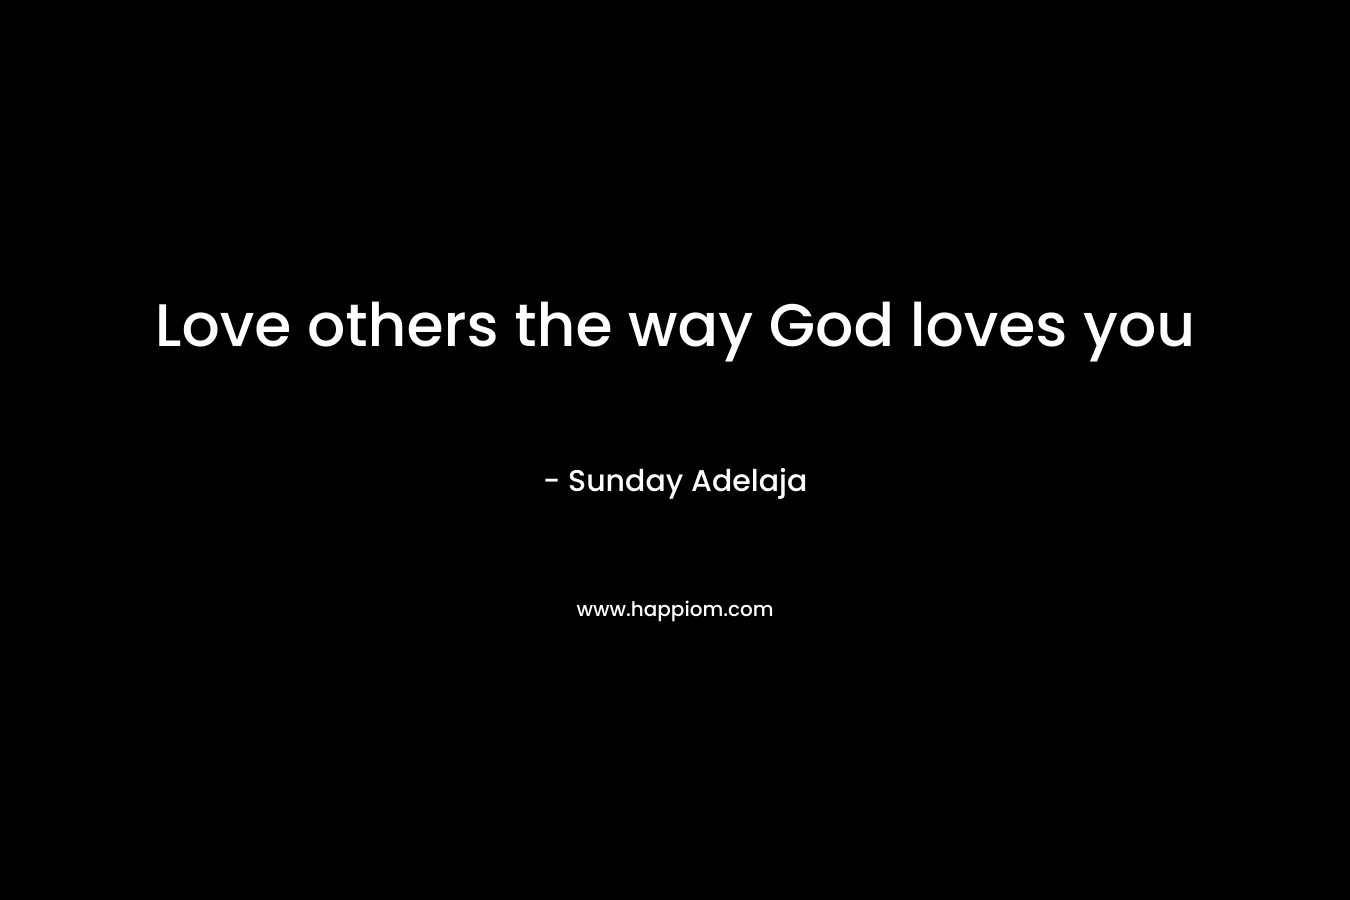 Love others the way God loves you